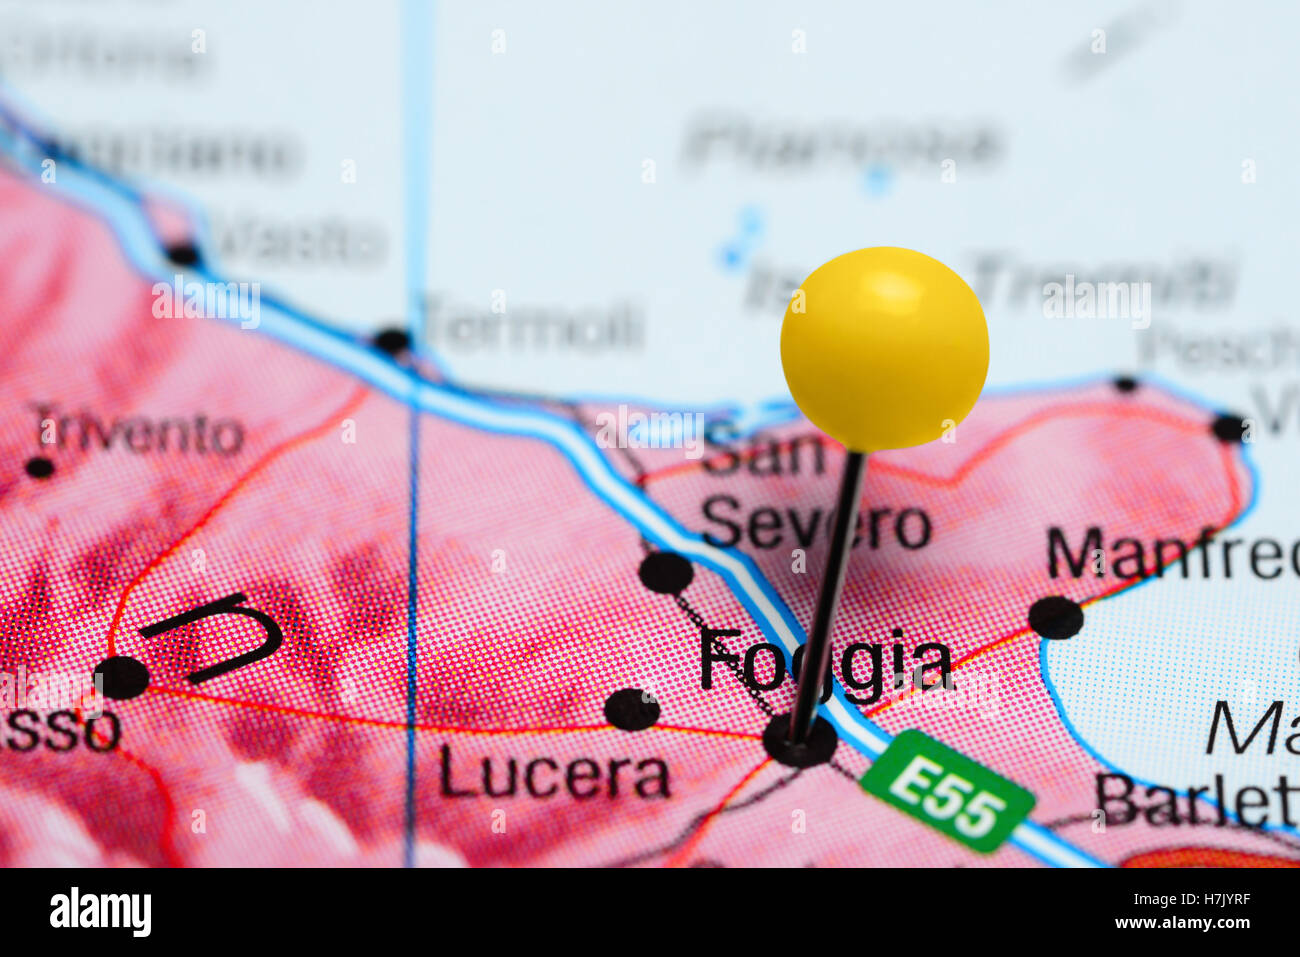 Foggia pinned on a map of Italy Stock Photo